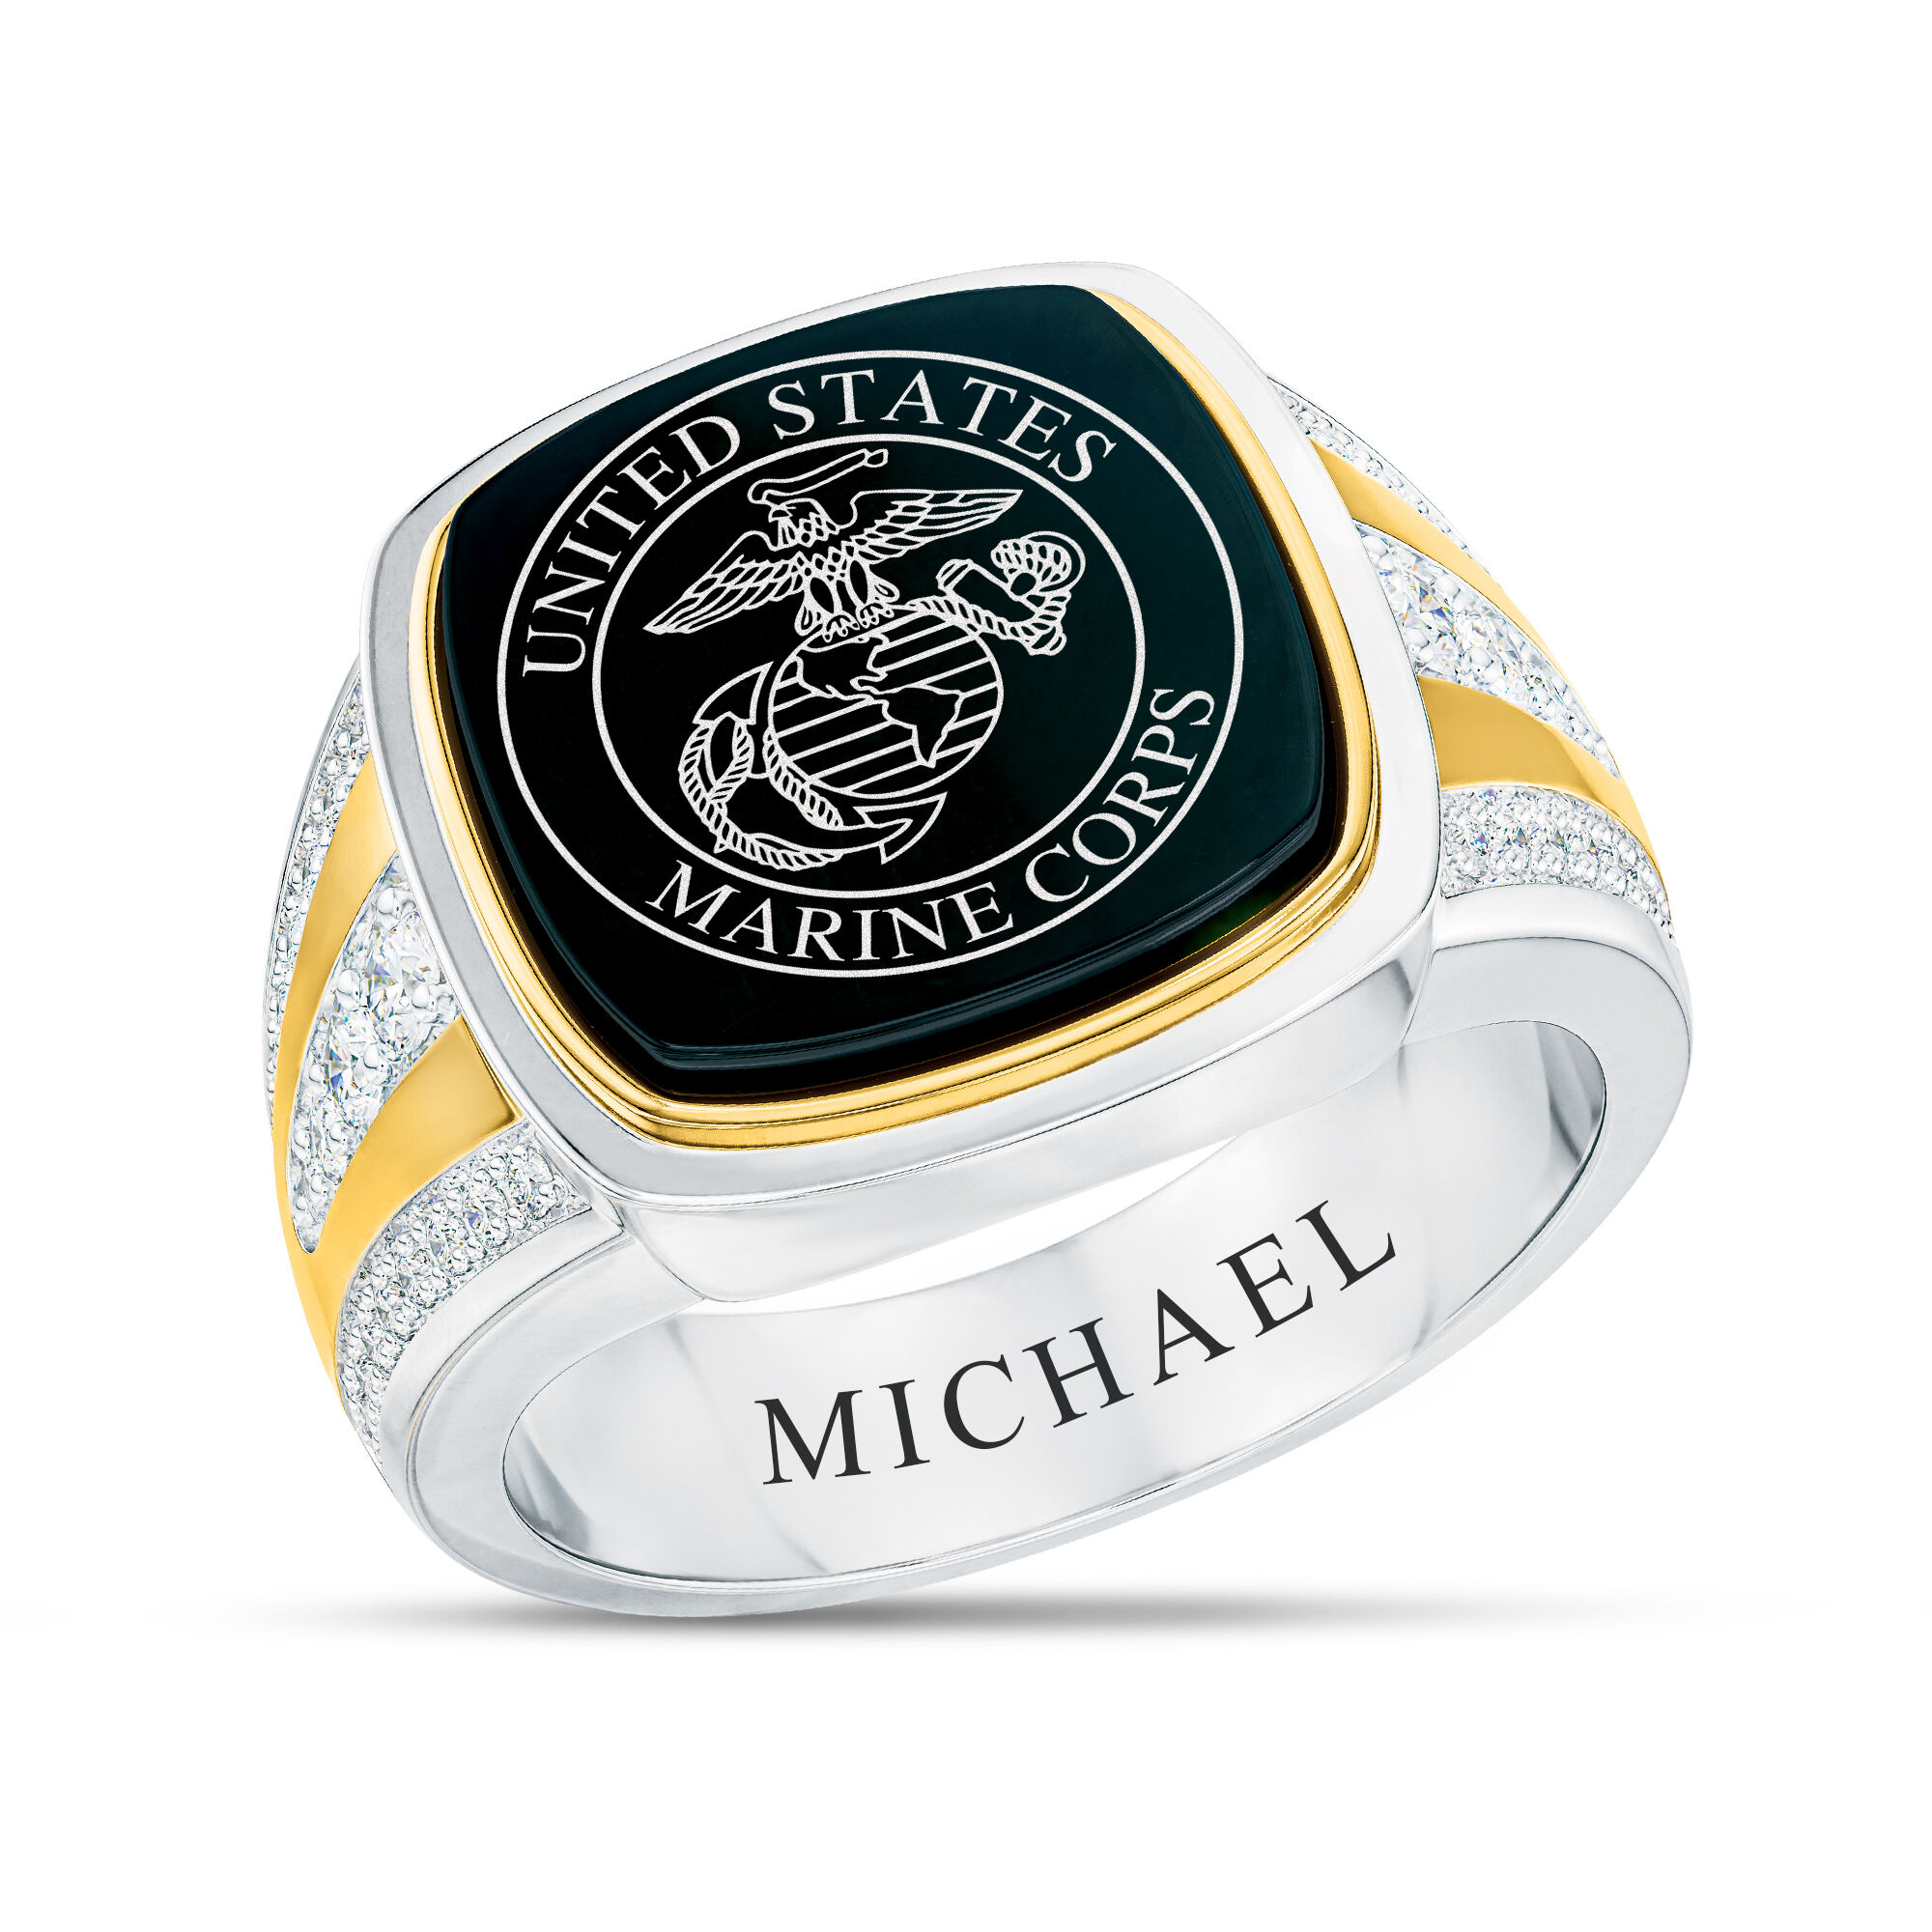 The US Marines Birthstone Ring 10347 0035 d april